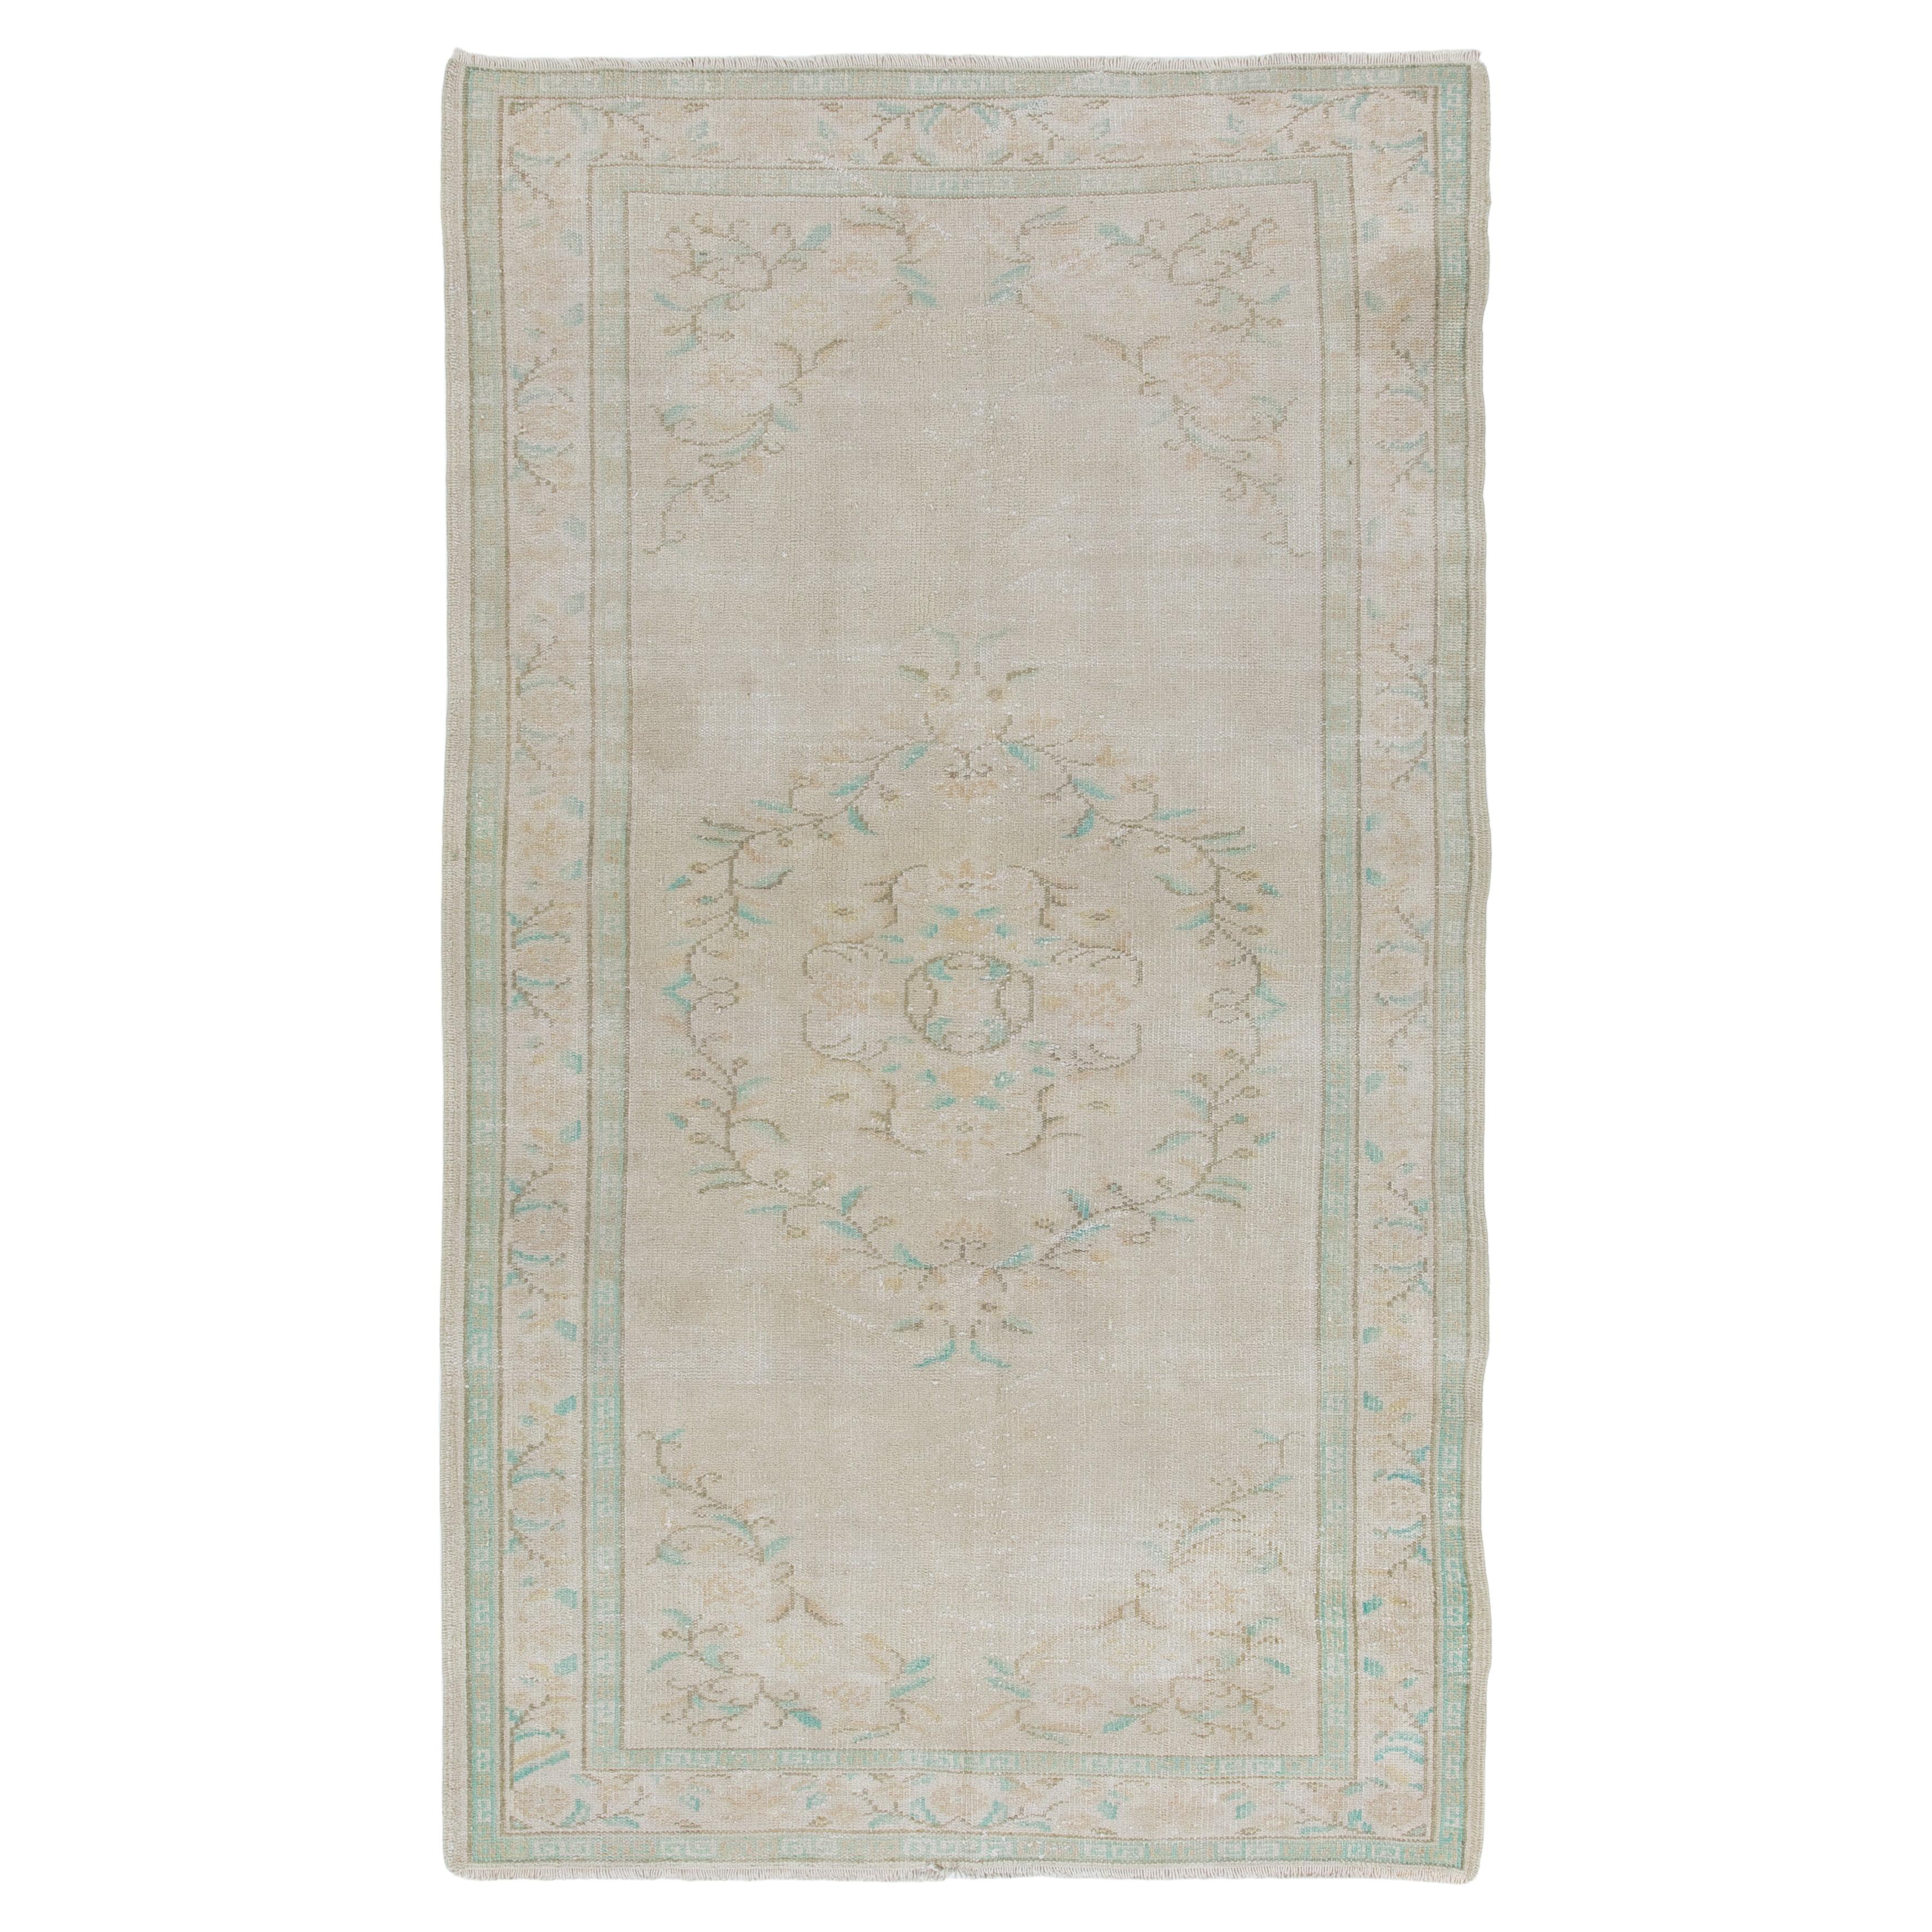 5x8.8 Ft Art Deco Chinese Inspired Vintage Handmade Turkish Faded Rug. Room-Size For Sale